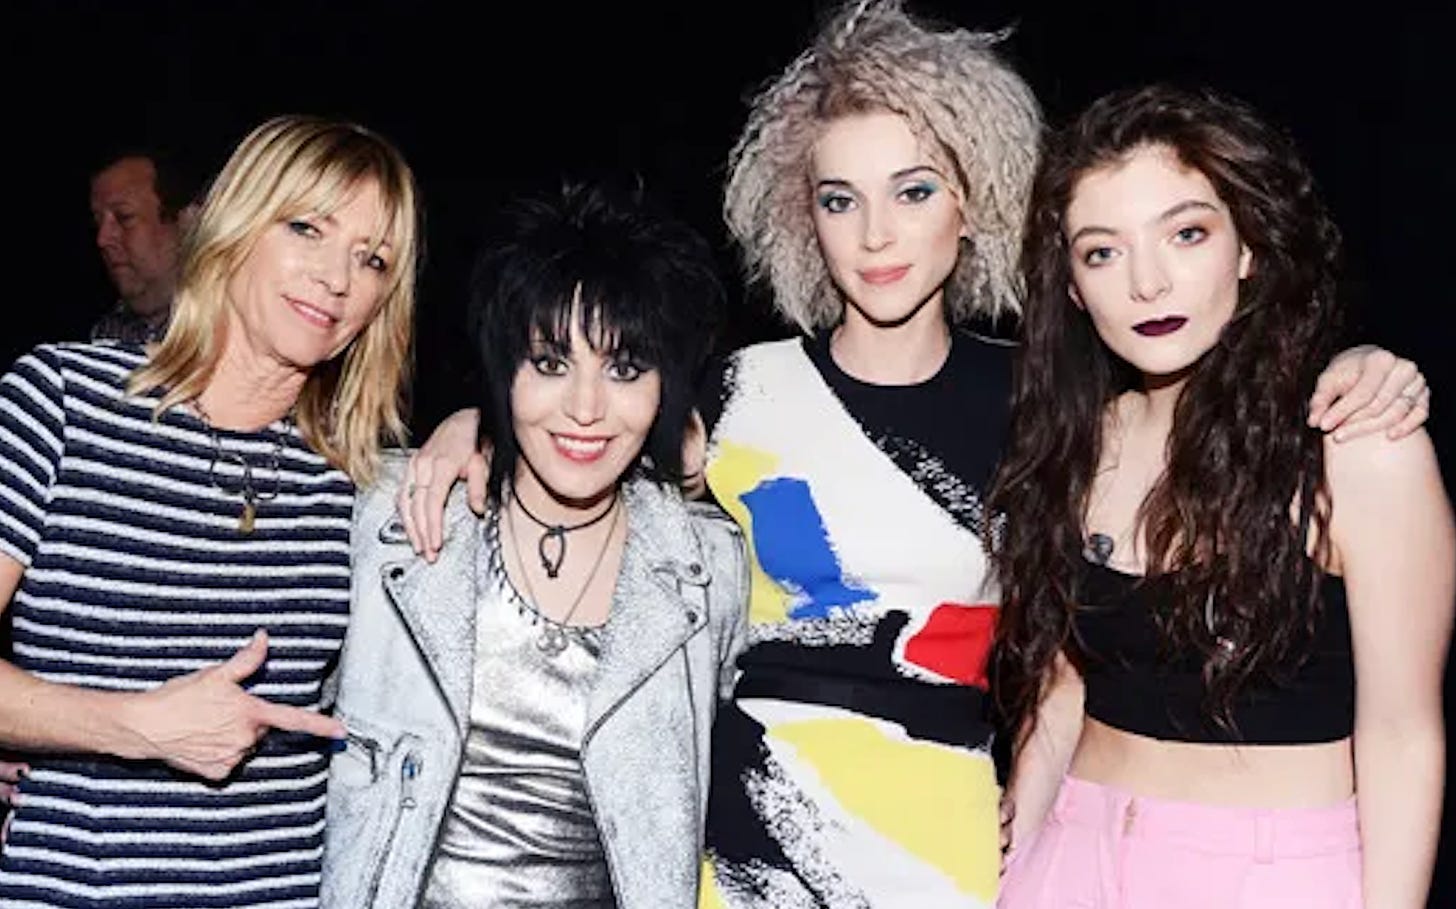 Women artists honor Nirvana at the 2014 Rock Hall of Fame Induction